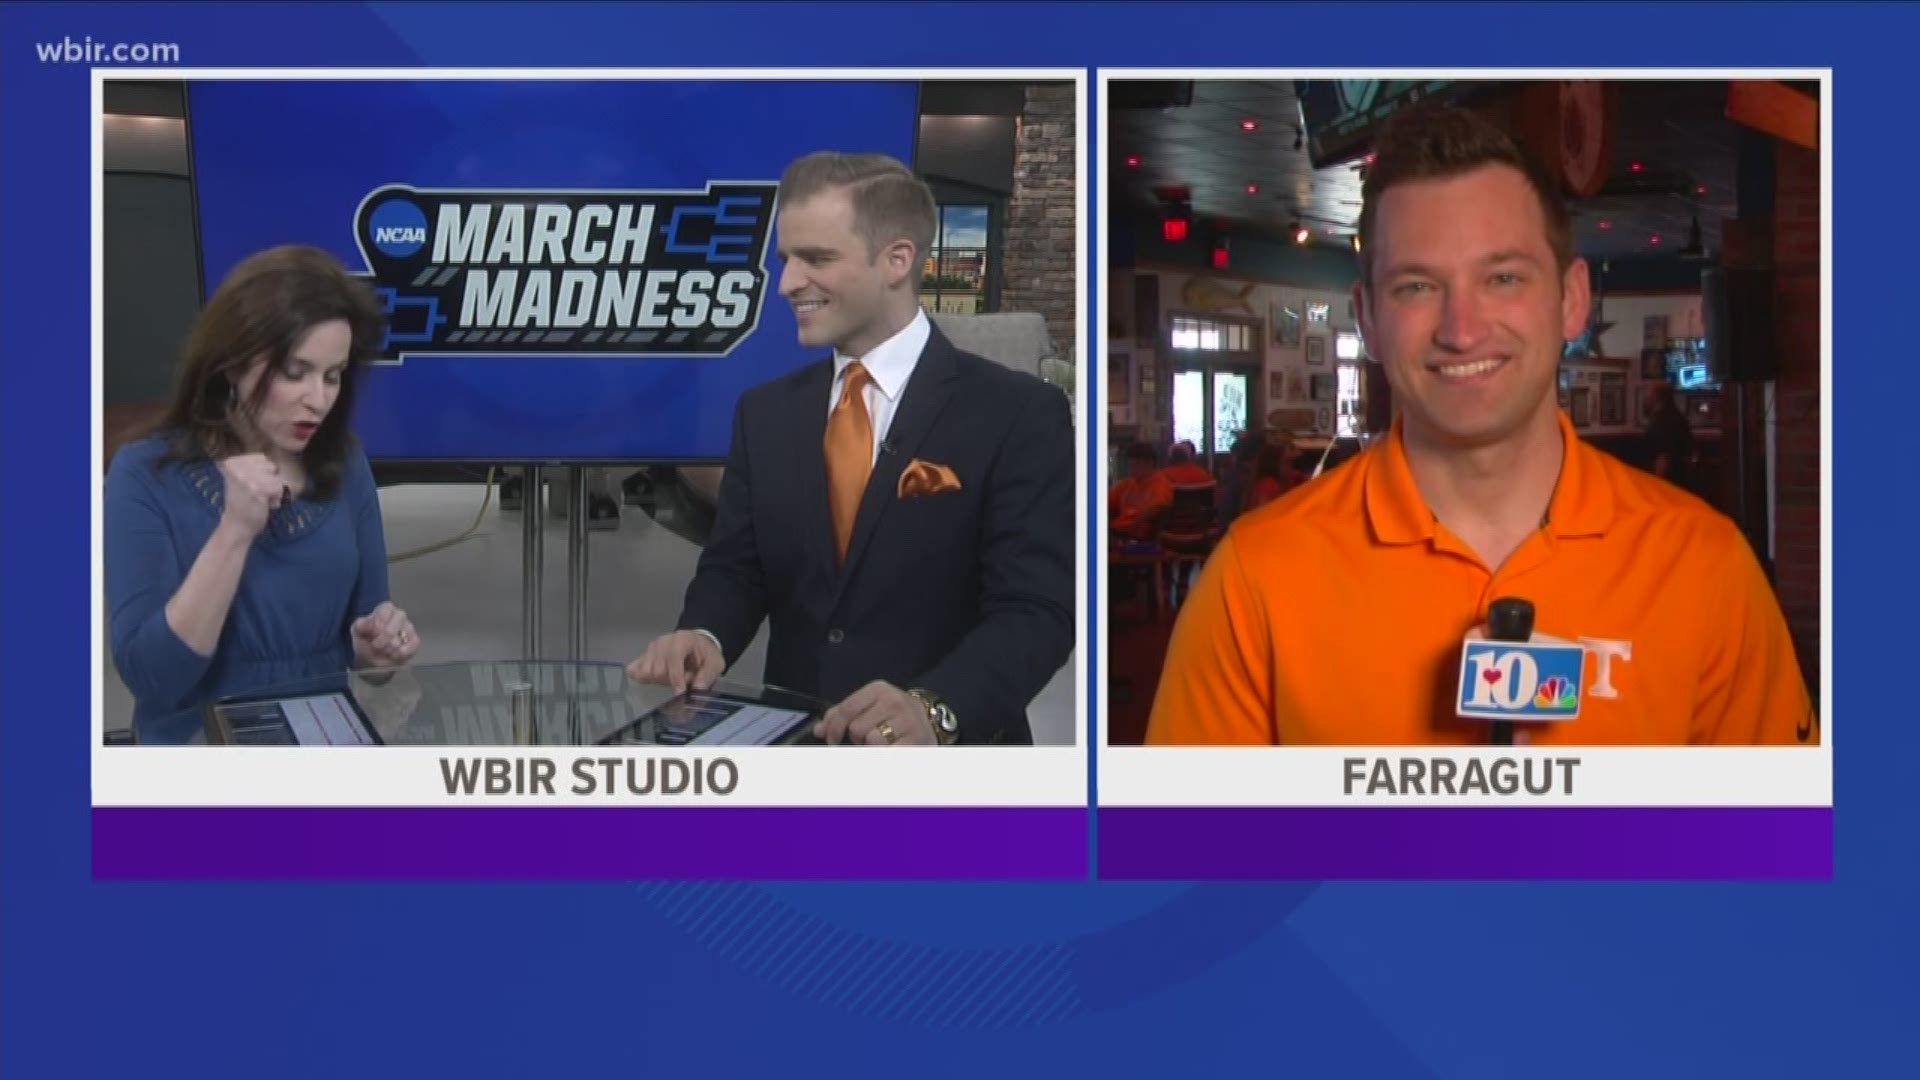 March Madness is upon us. Sean Franklin checks in with Vol fans watching the game at Wild Wings Cafe in Farragut and how one business helped treat folks to a day of basketball watching. March 22, 2019-4pm